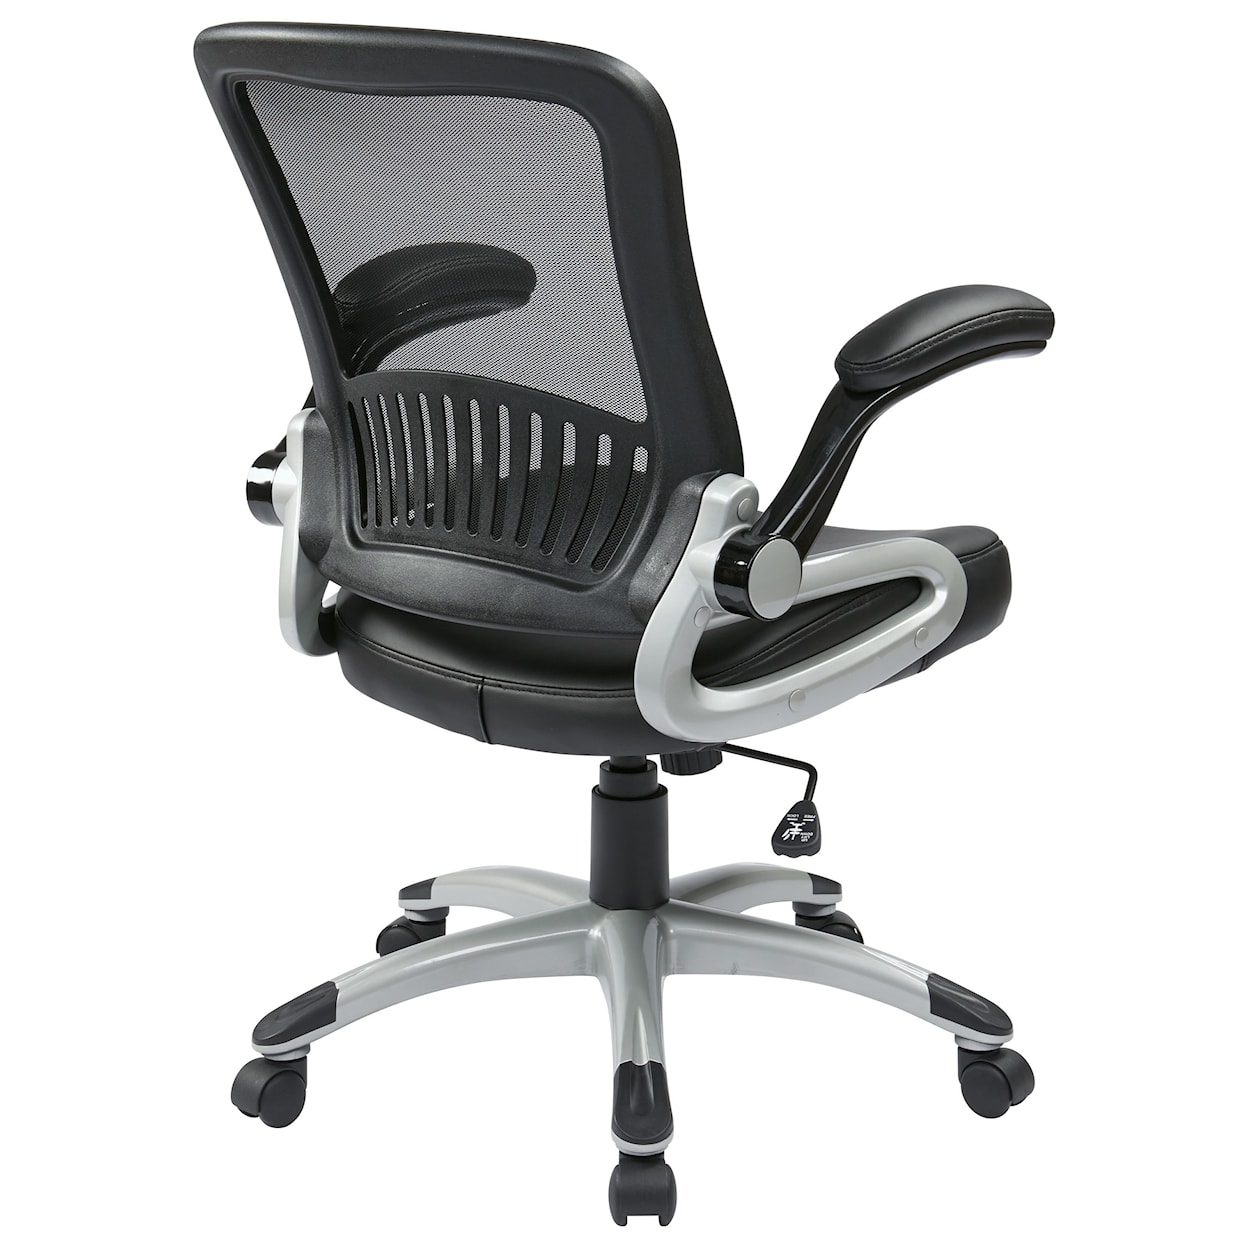 Office Star EM Series Screen Back Seat Managers Chair